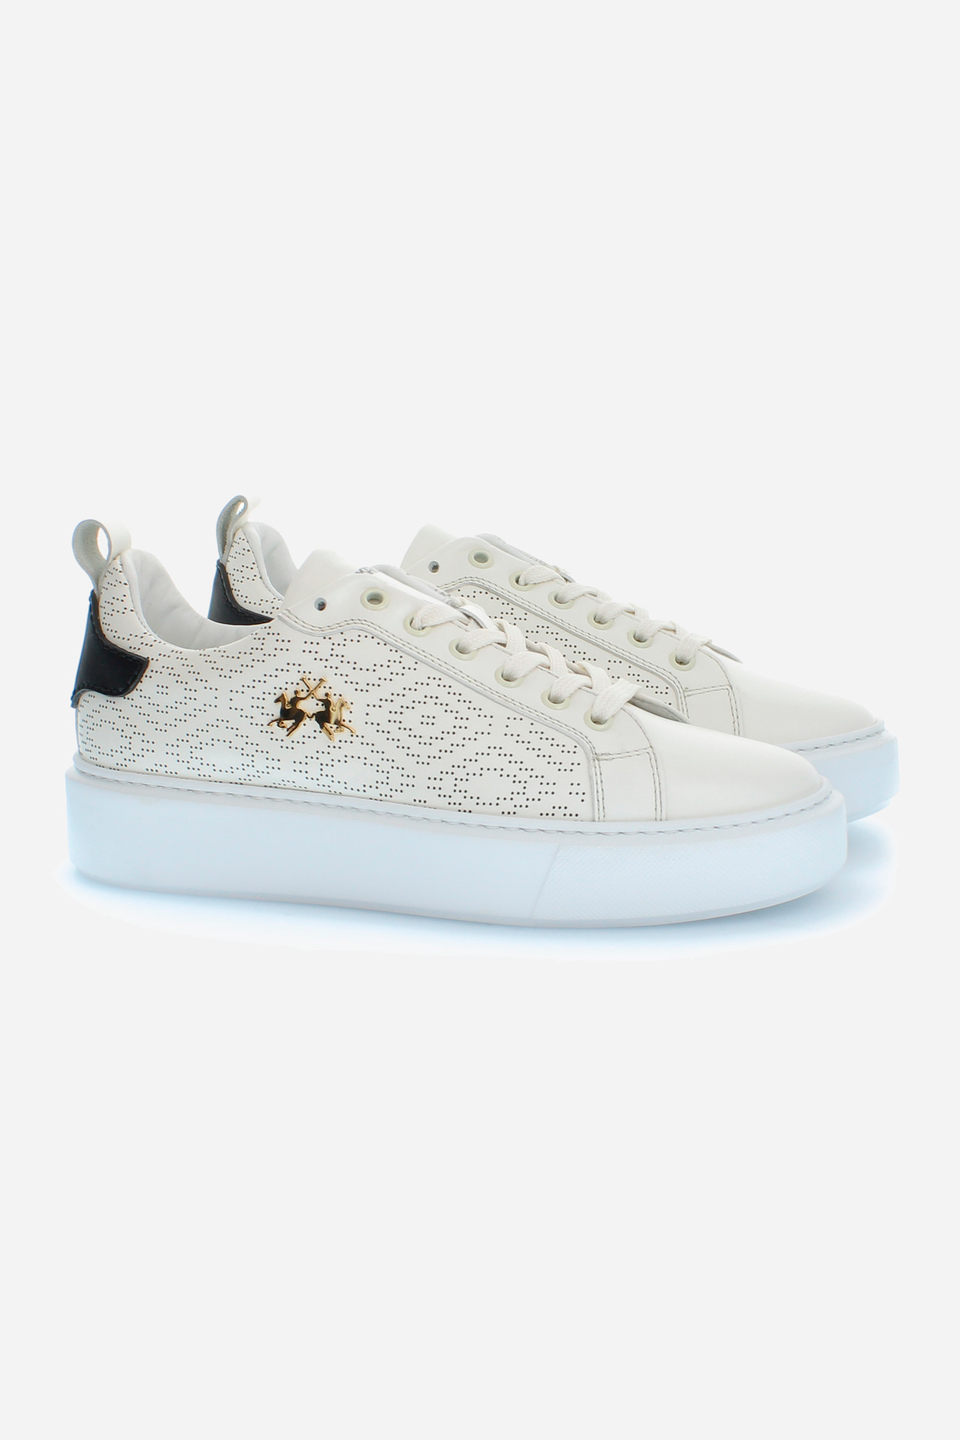 Women's trainers in perforated leather | La Martina - Official Online Shop